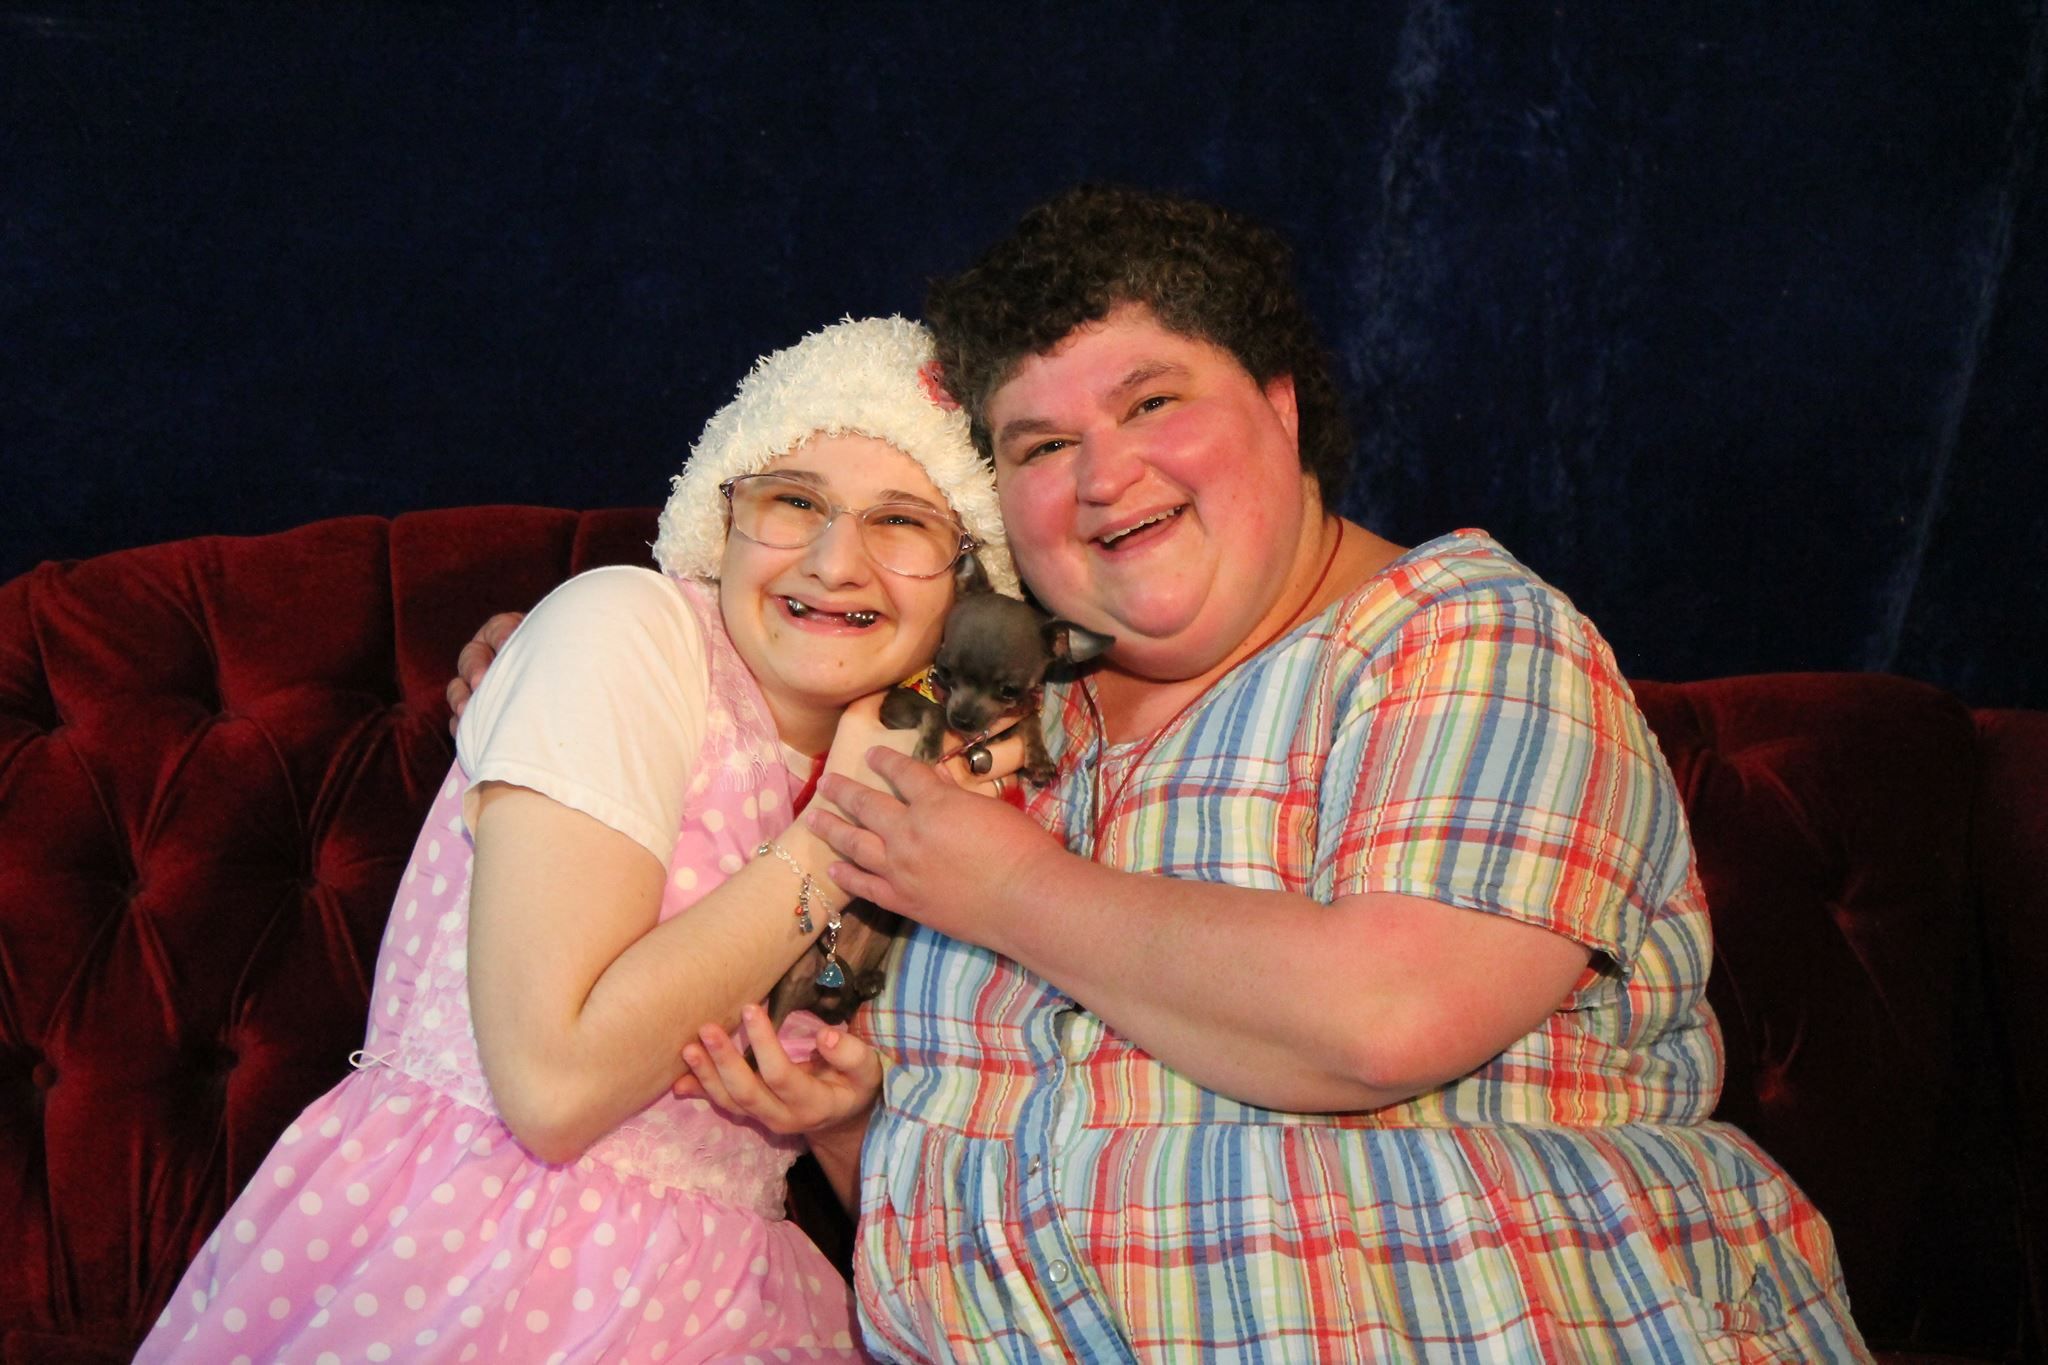 Why Gypsy Rose Blanchard HAD to Kill Her Mother